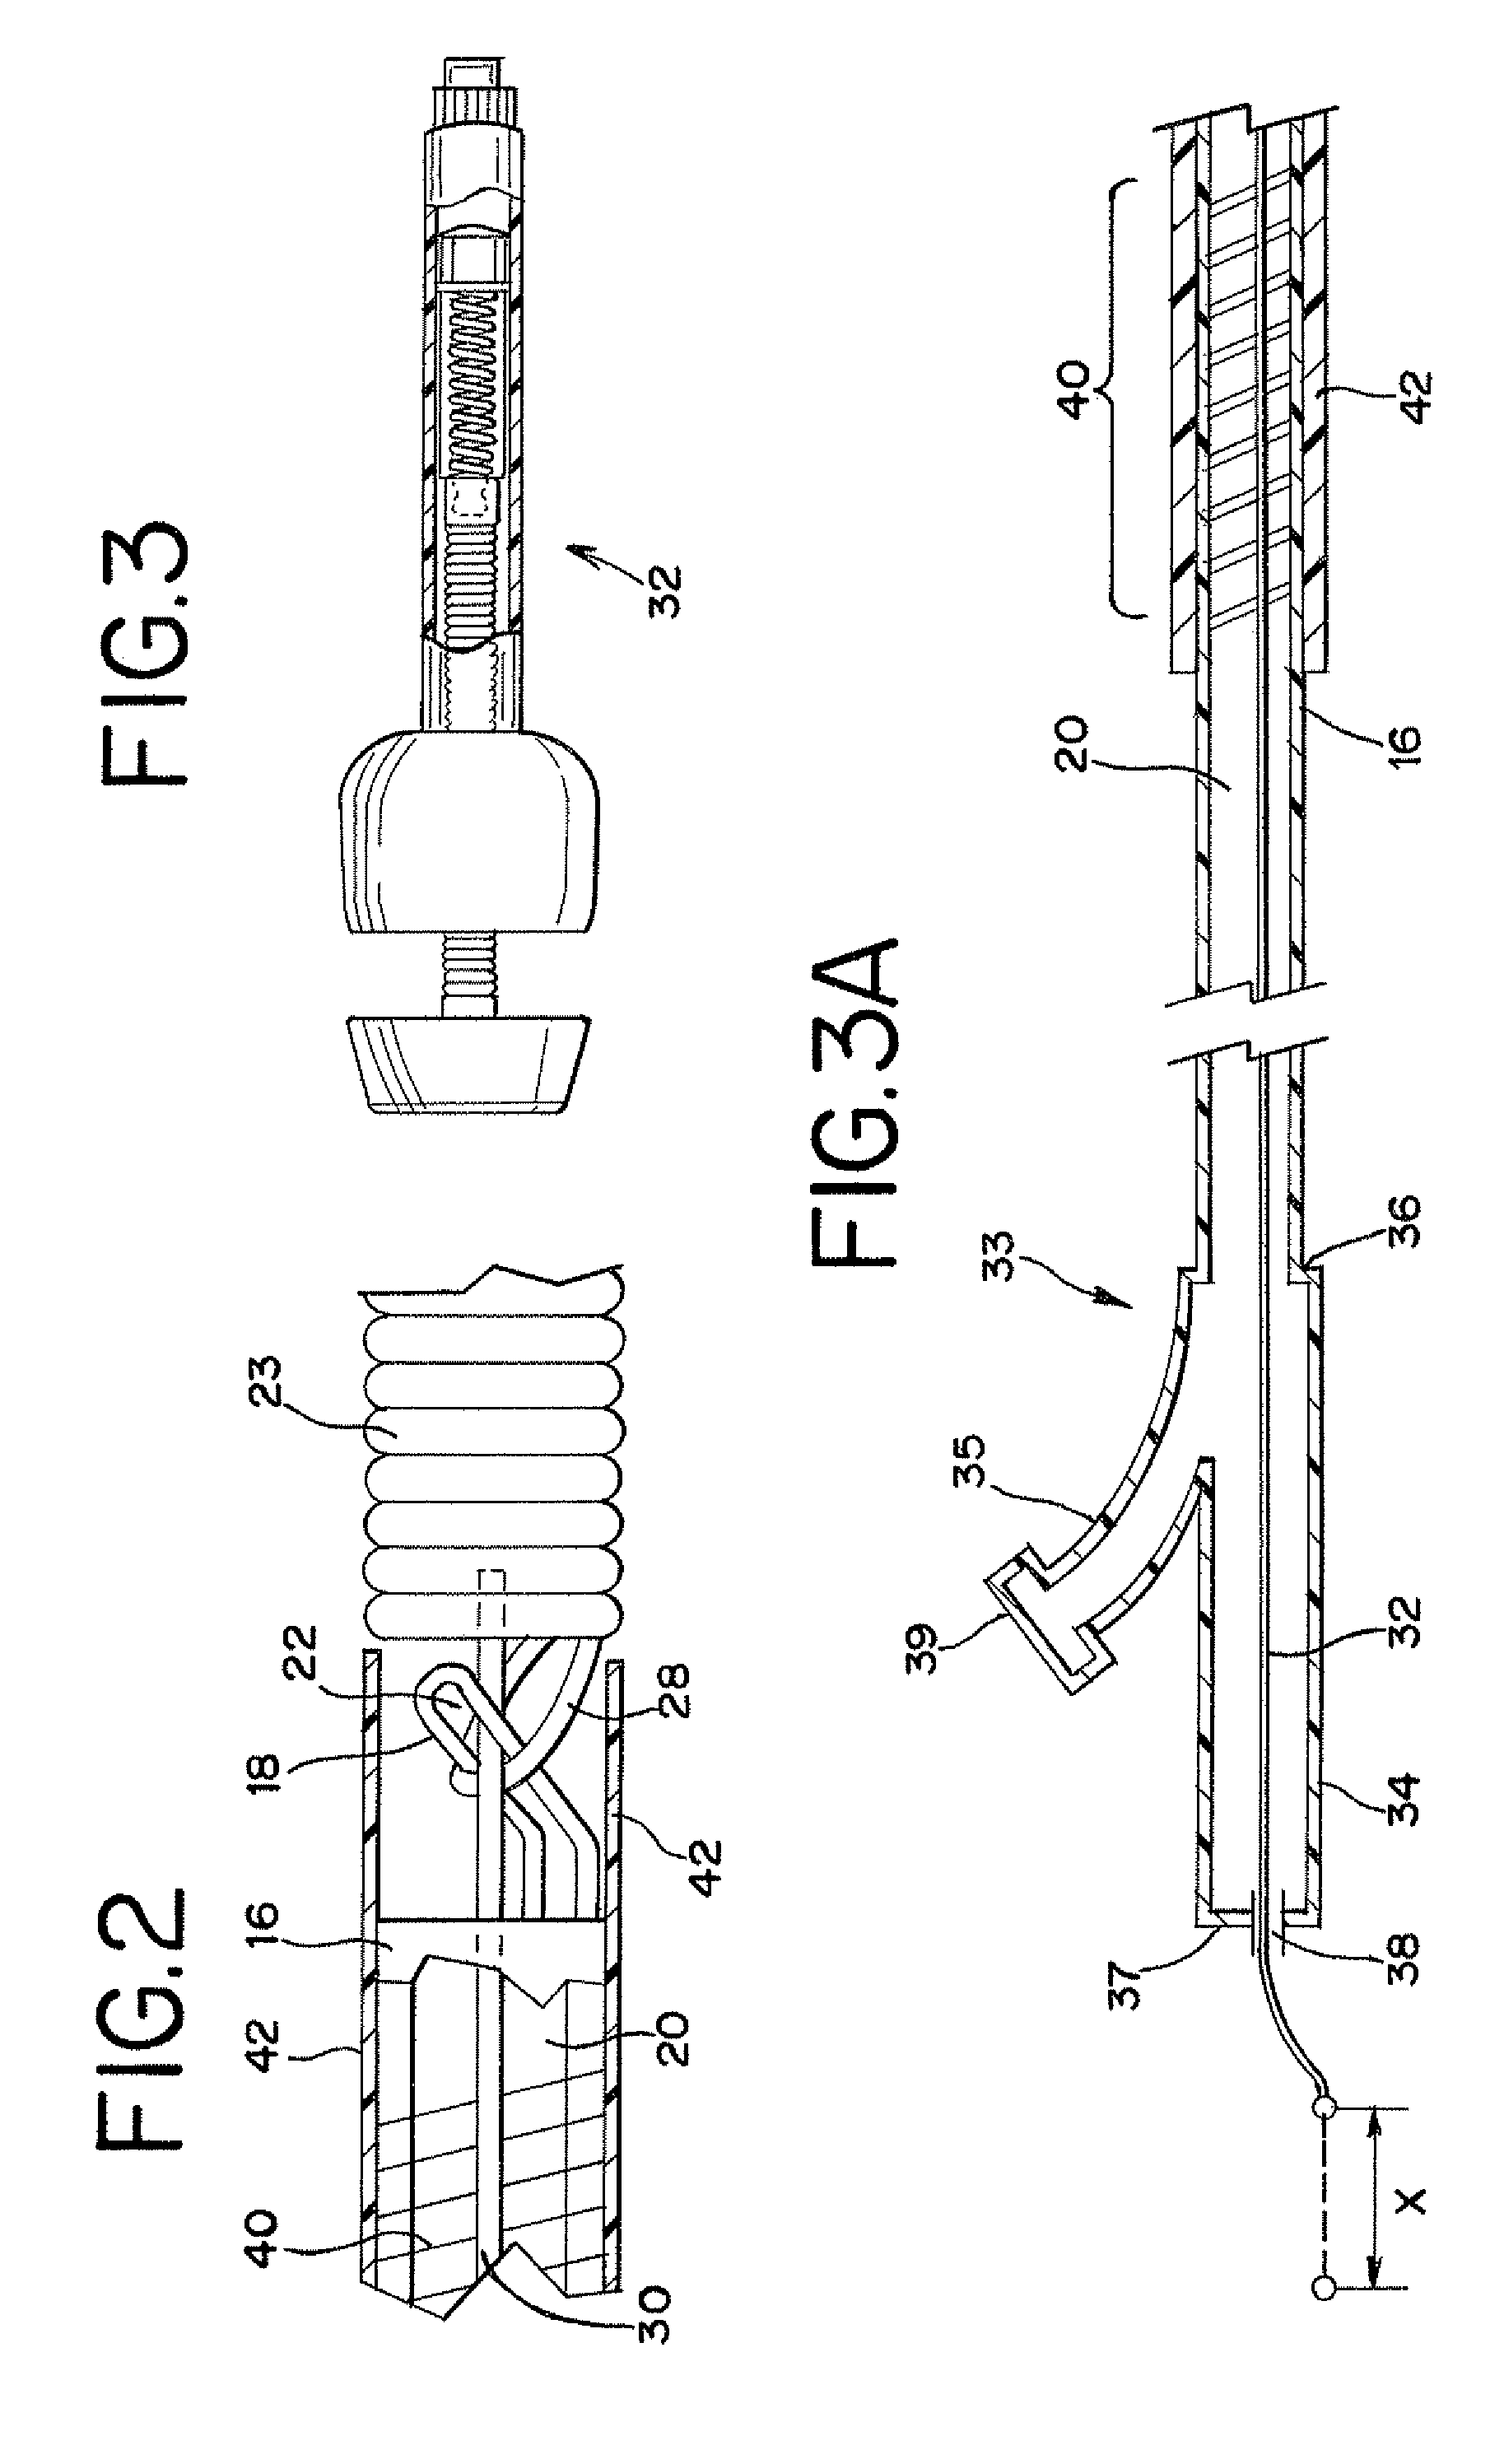 Stretch resistant embolic coil delivery system with combined mechanical and pressure release mechanism